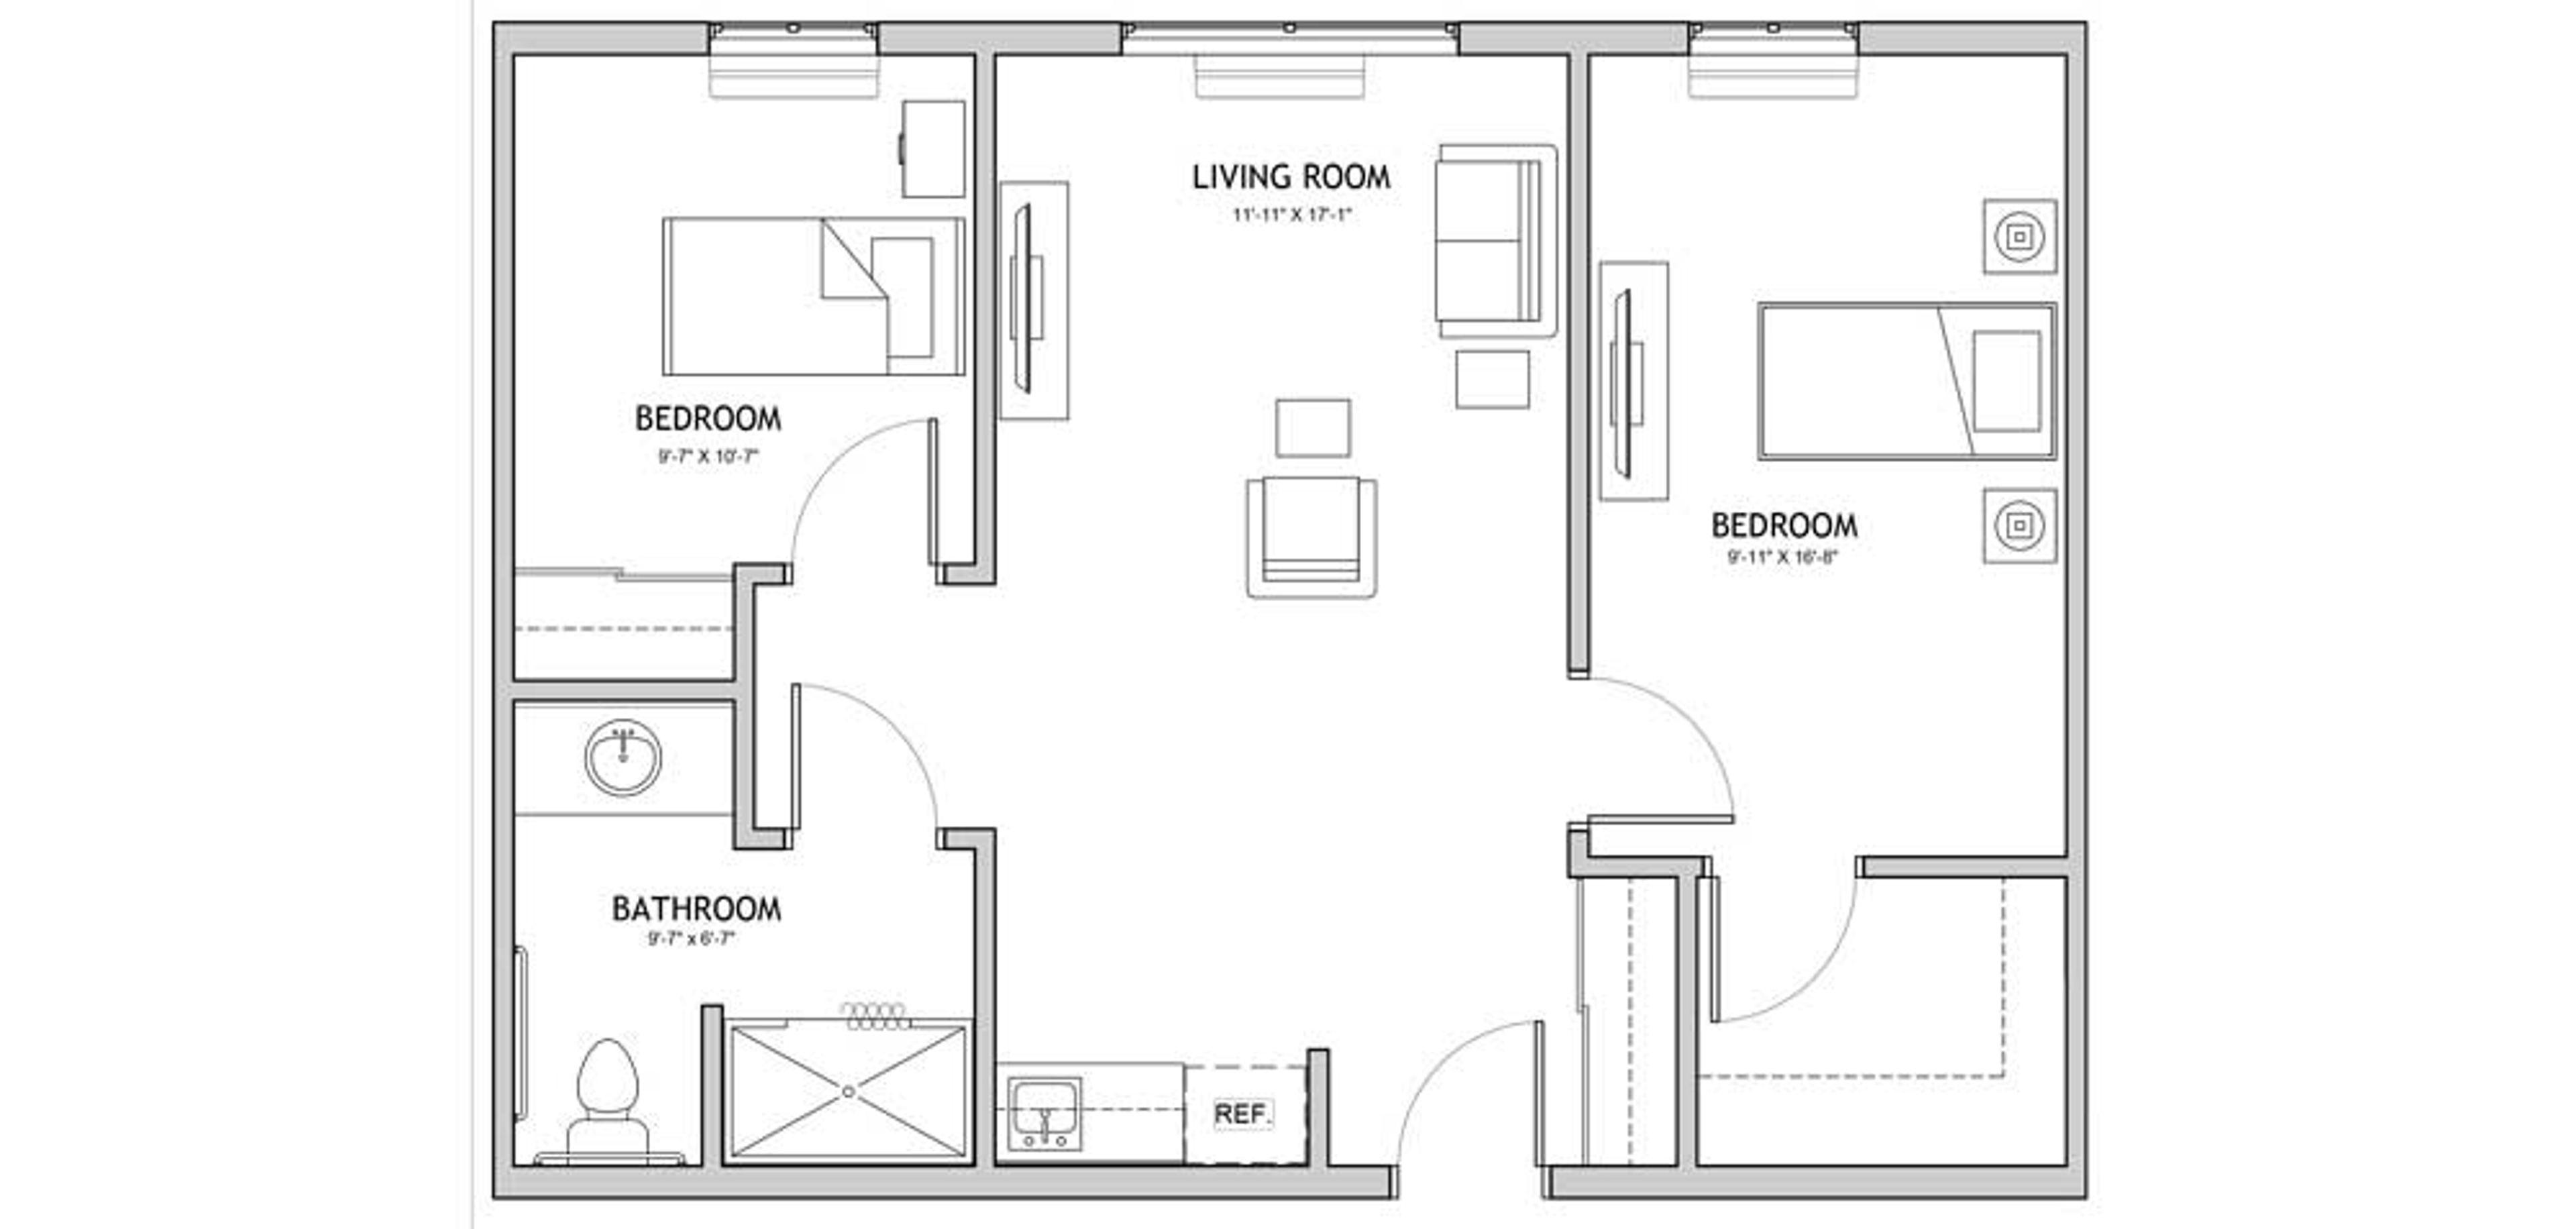 Floorplan - The Auberge at North Ogden - 2 bed, 1 bath, 798 sq. ft. Assisted Living